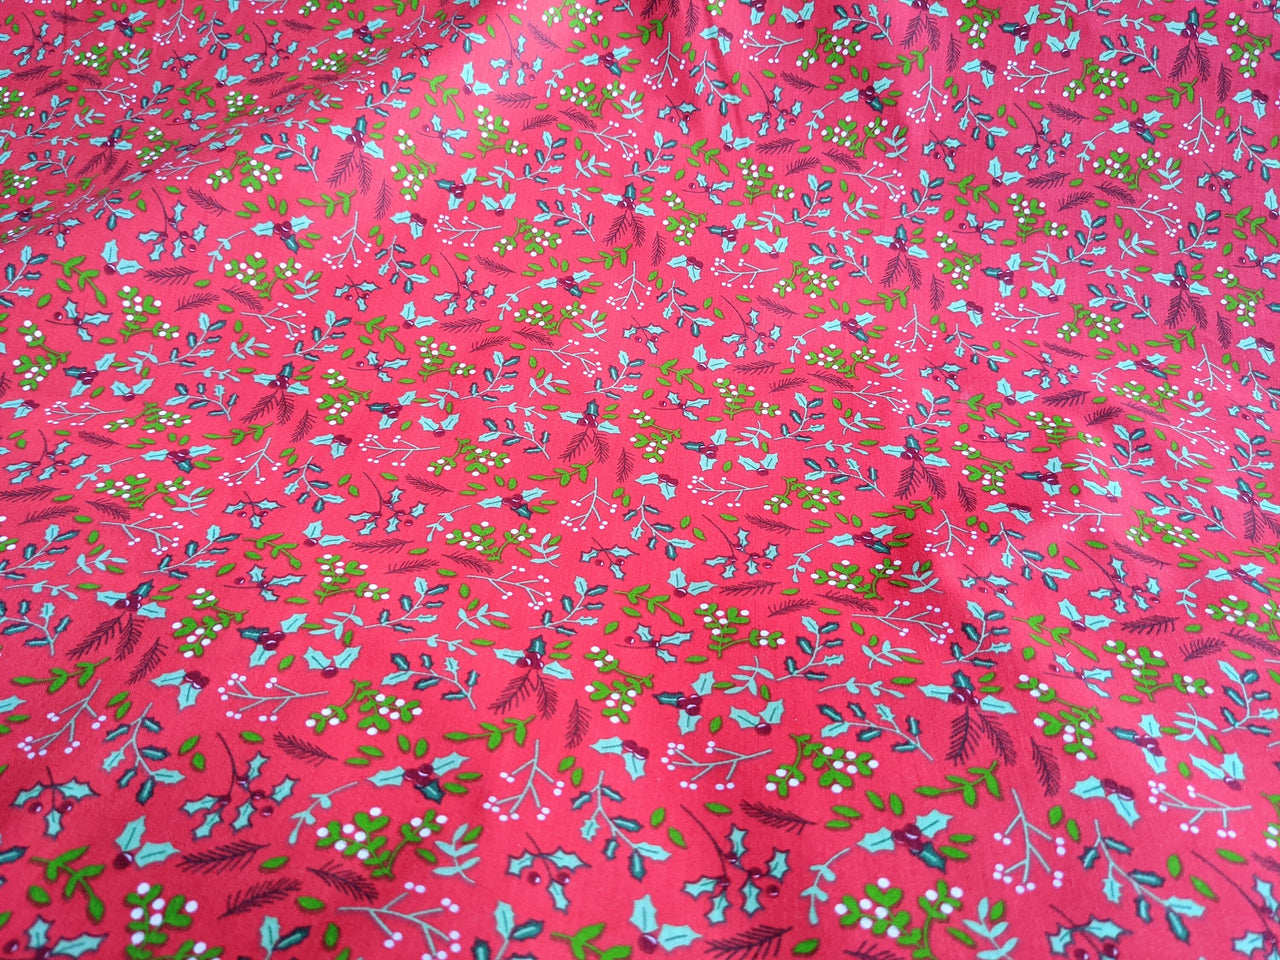 Red Sally Polycotton Holly Leaves Christmas Fabric, Festive Fabric, Holiday Fabric